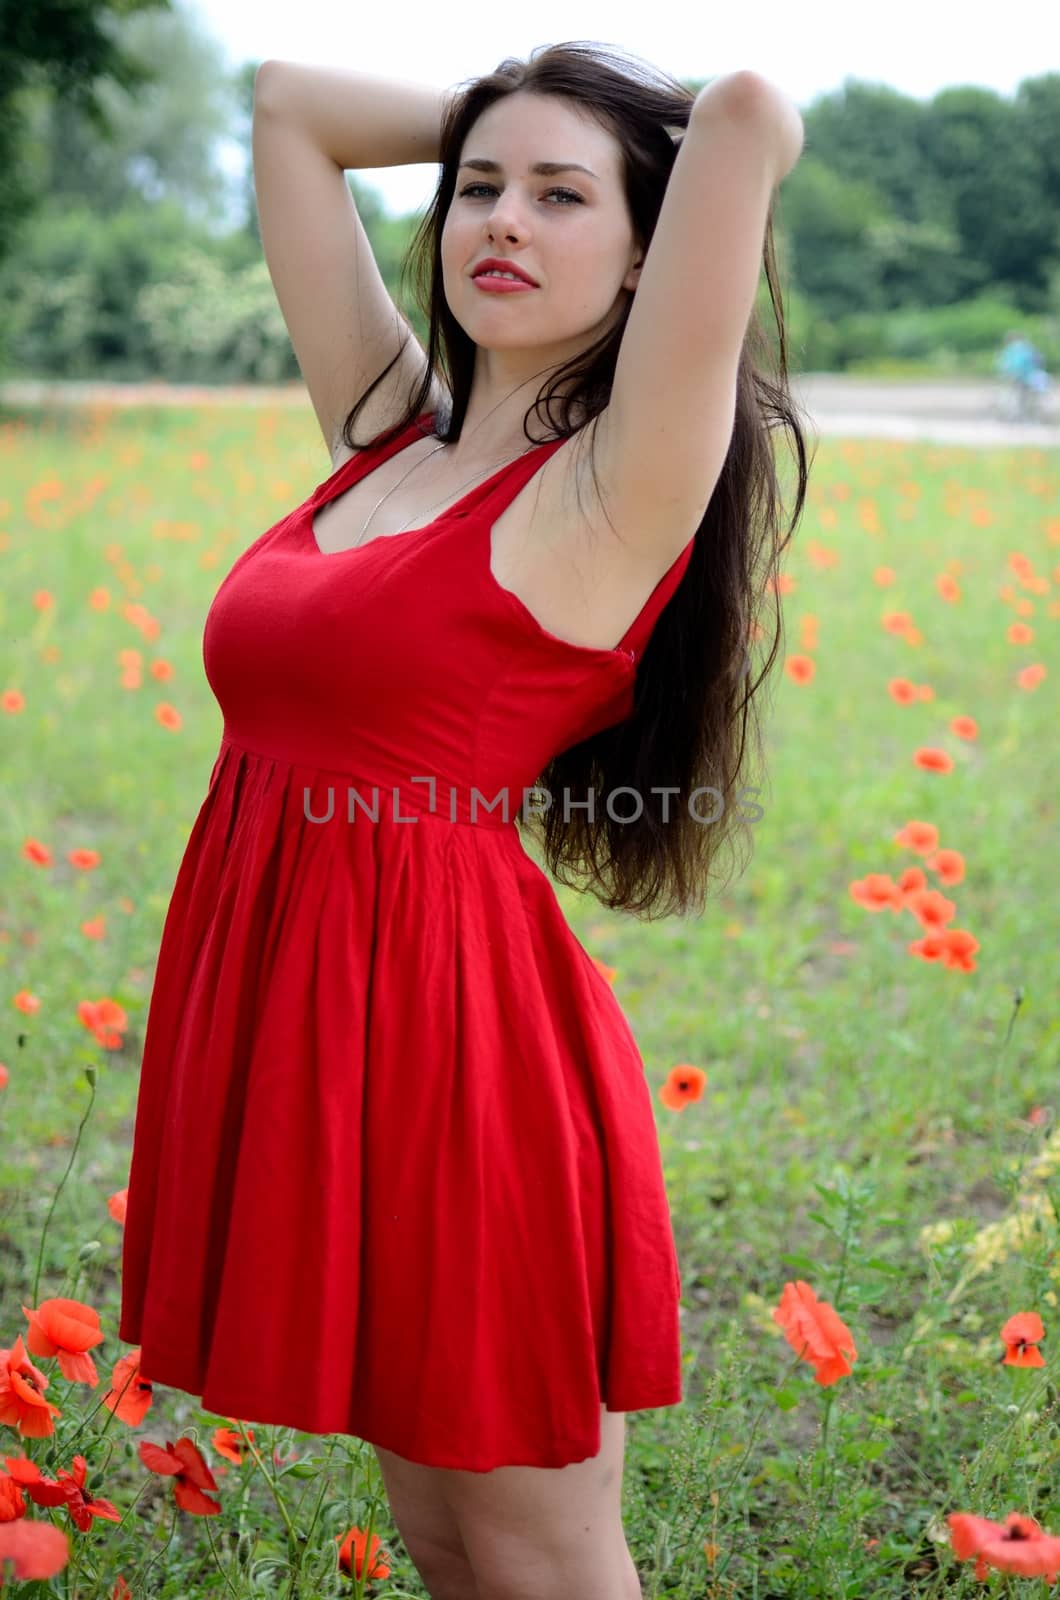 Shapely girl with red dress. Young female model standing in red dress, surrounded by poppies and green grass.